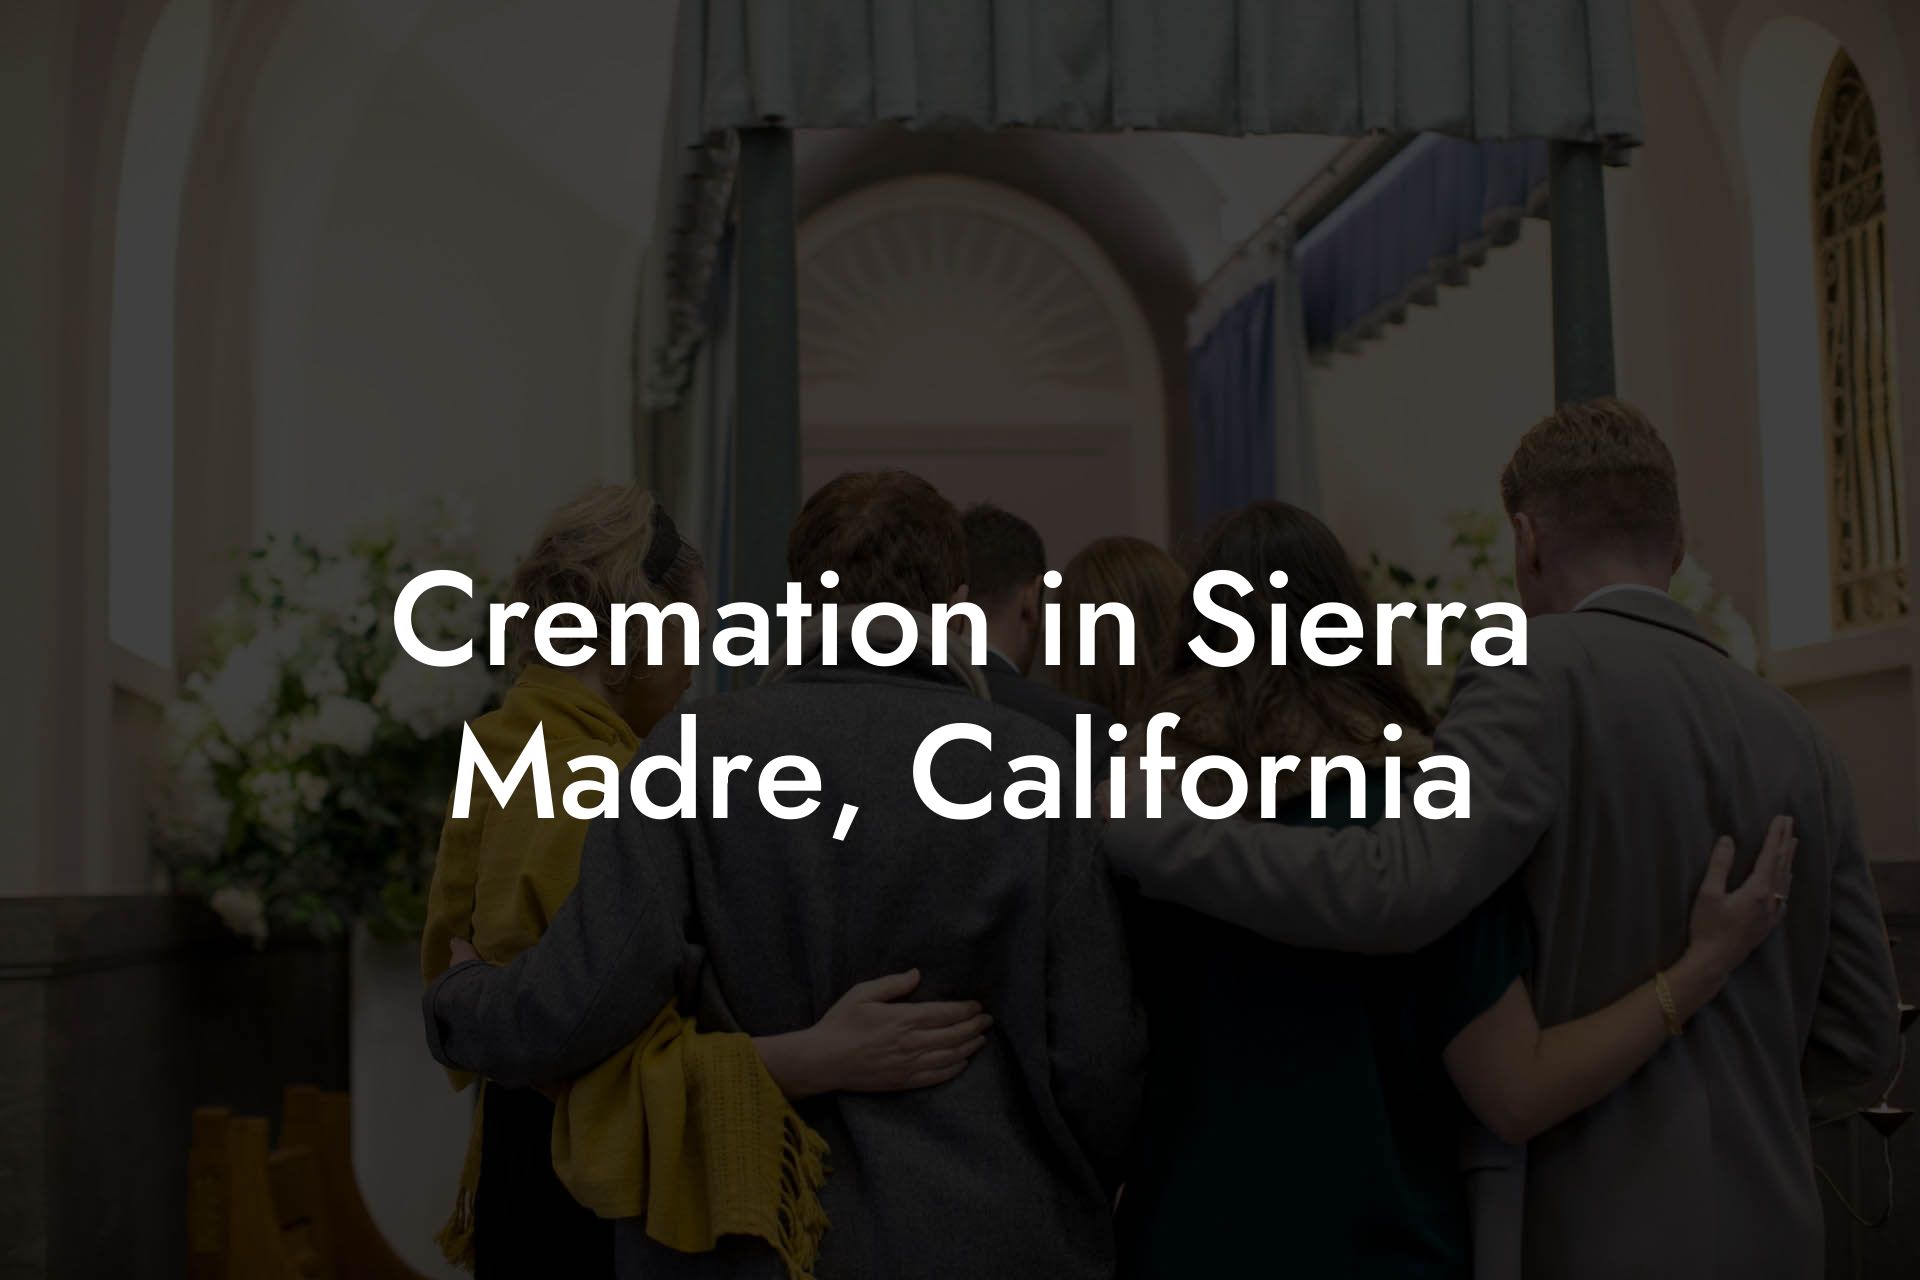 Cremation in Sierra Madre, California